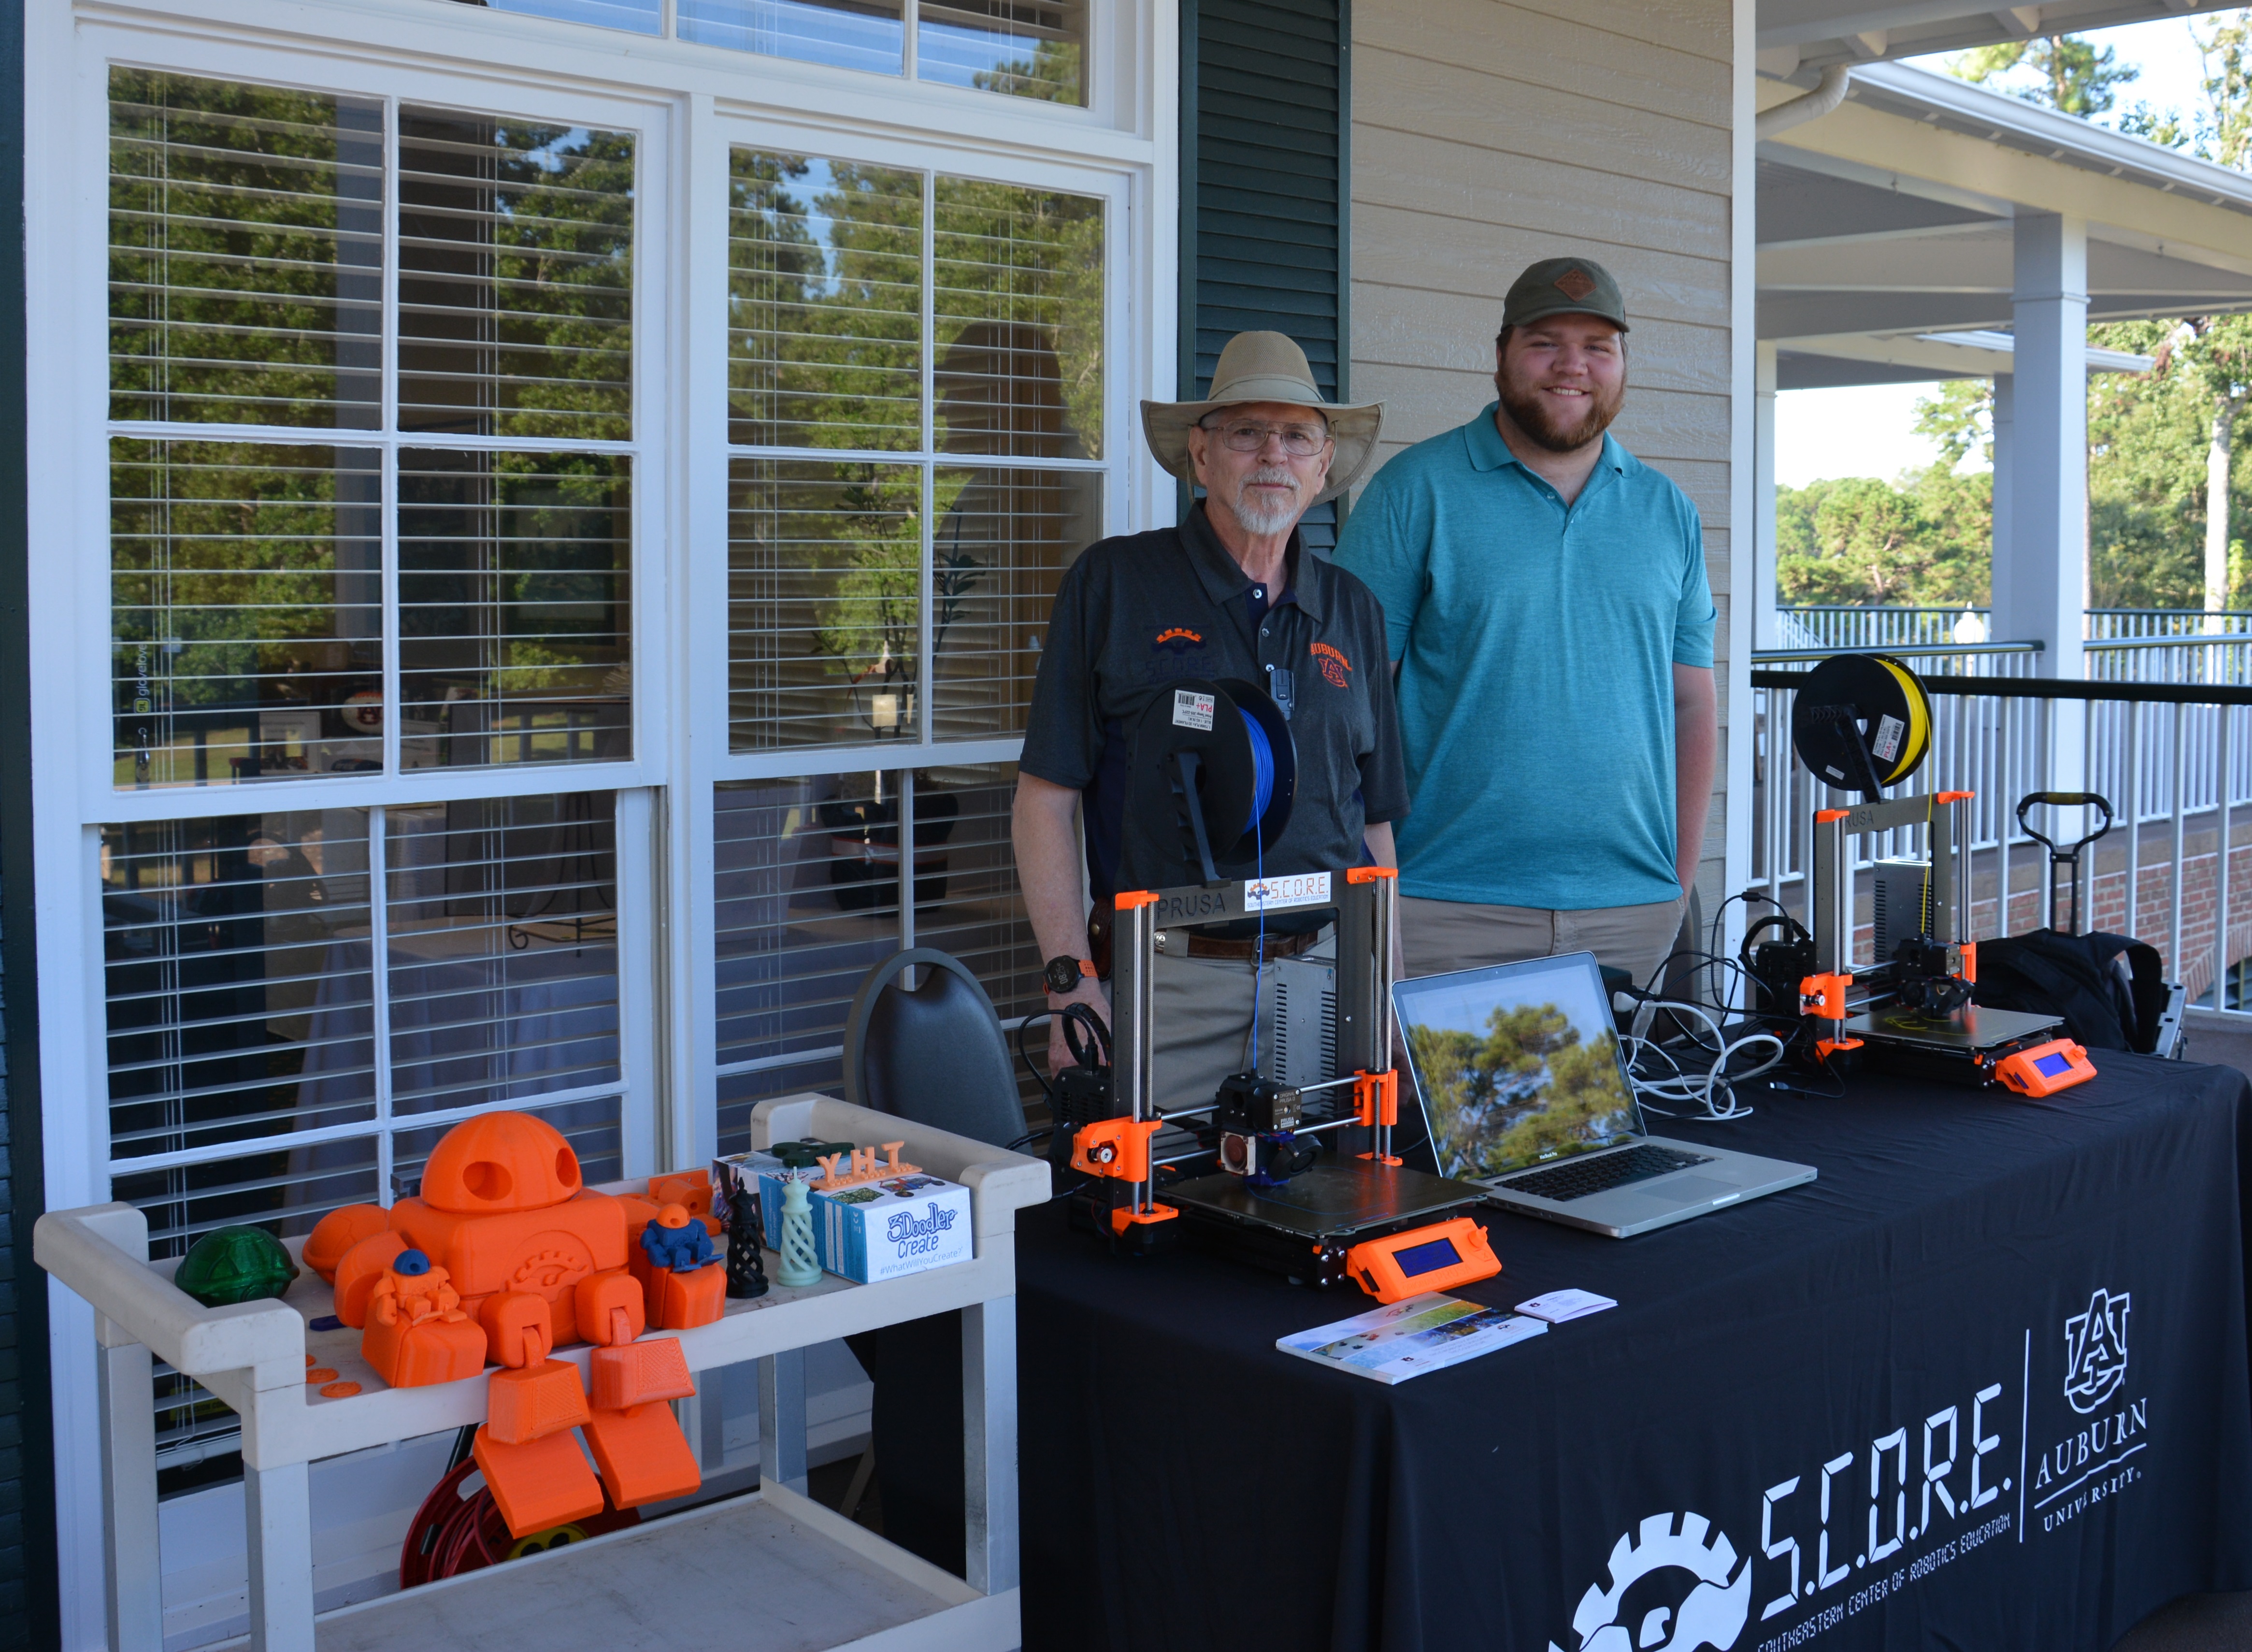 Frank Ware and Hunter Terry from Auburn’s Southeastern Center of Robotics Education (SCORE) demonstrate 3D printing. 